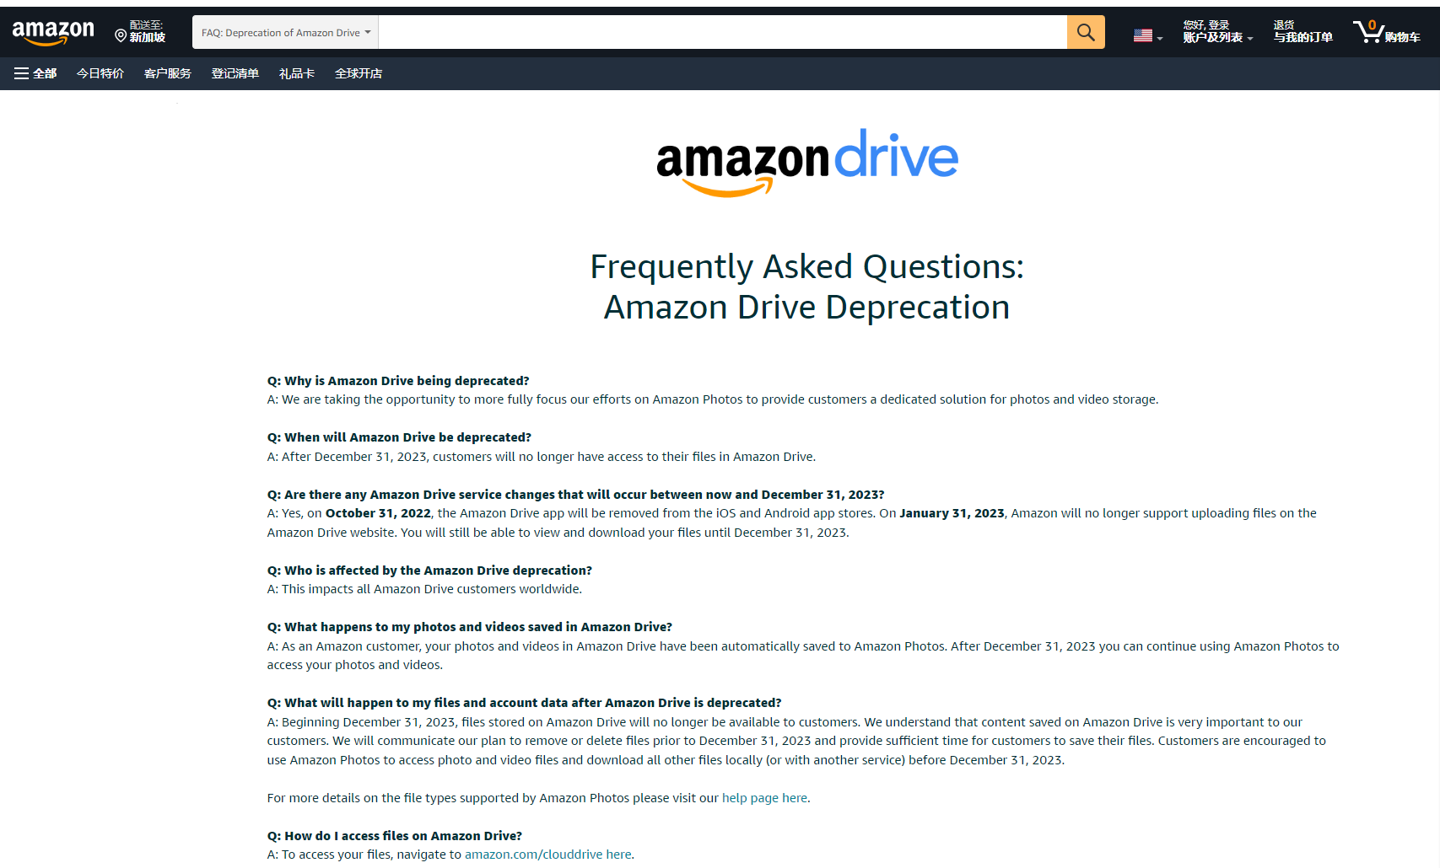 Amazon announces it will shut down Amazon Drive cloud storage service after 11 years